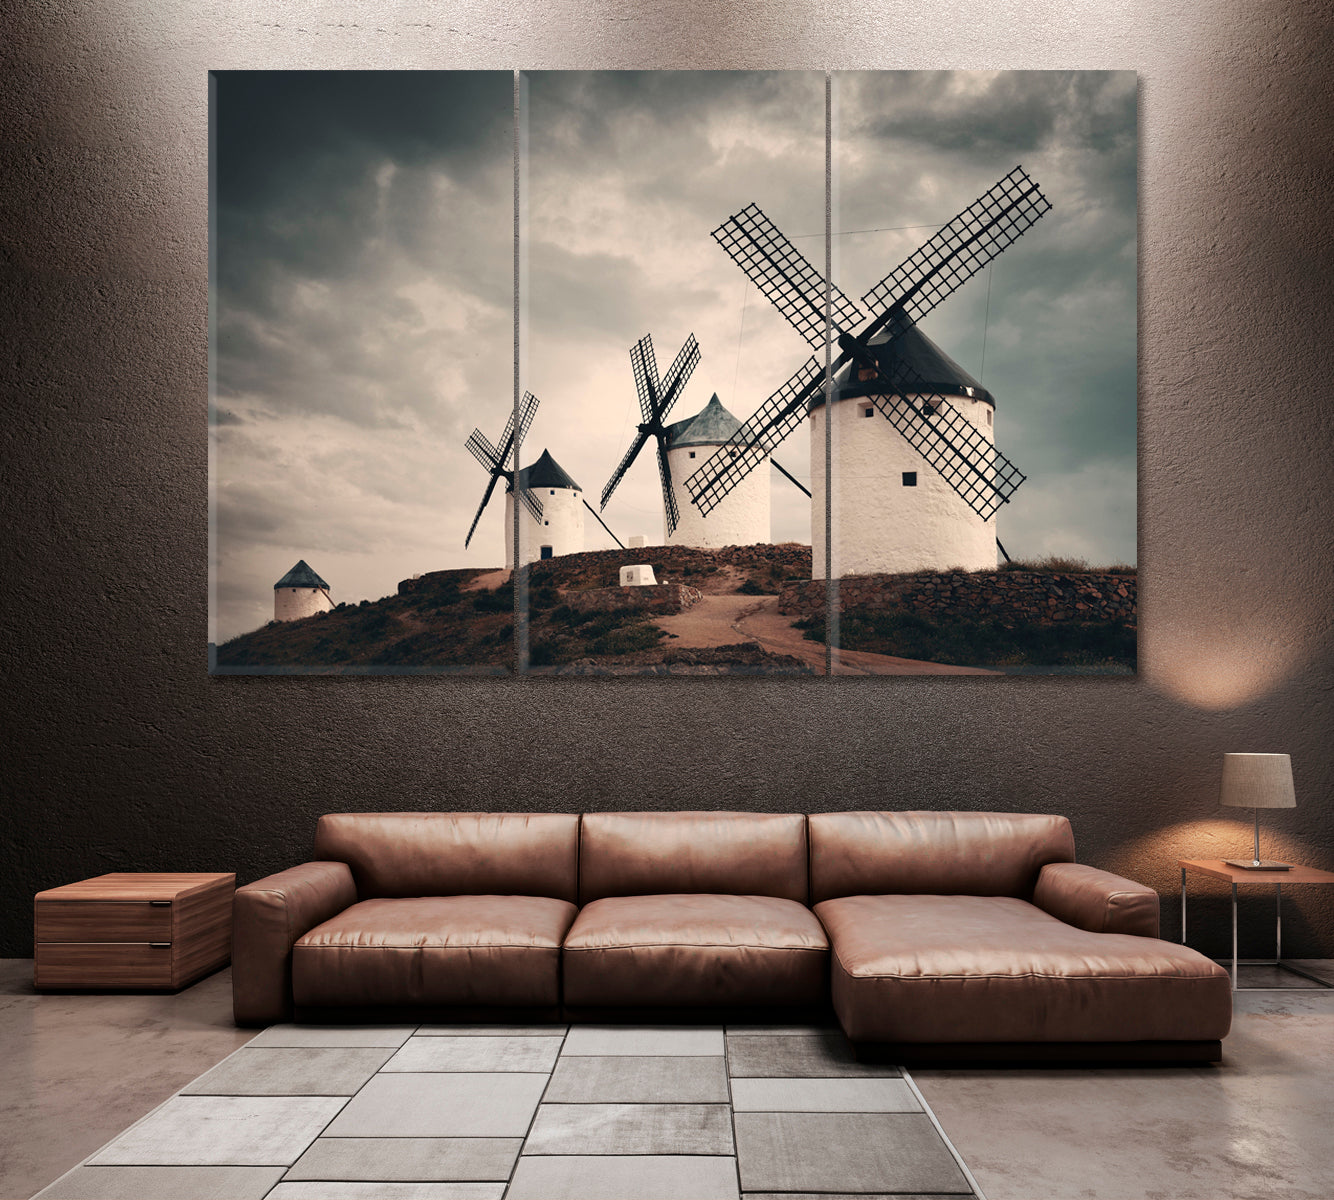 Windmills in Consuegra Spain Canvas Print ArtLexy 3 Panels 36"x24" inches 